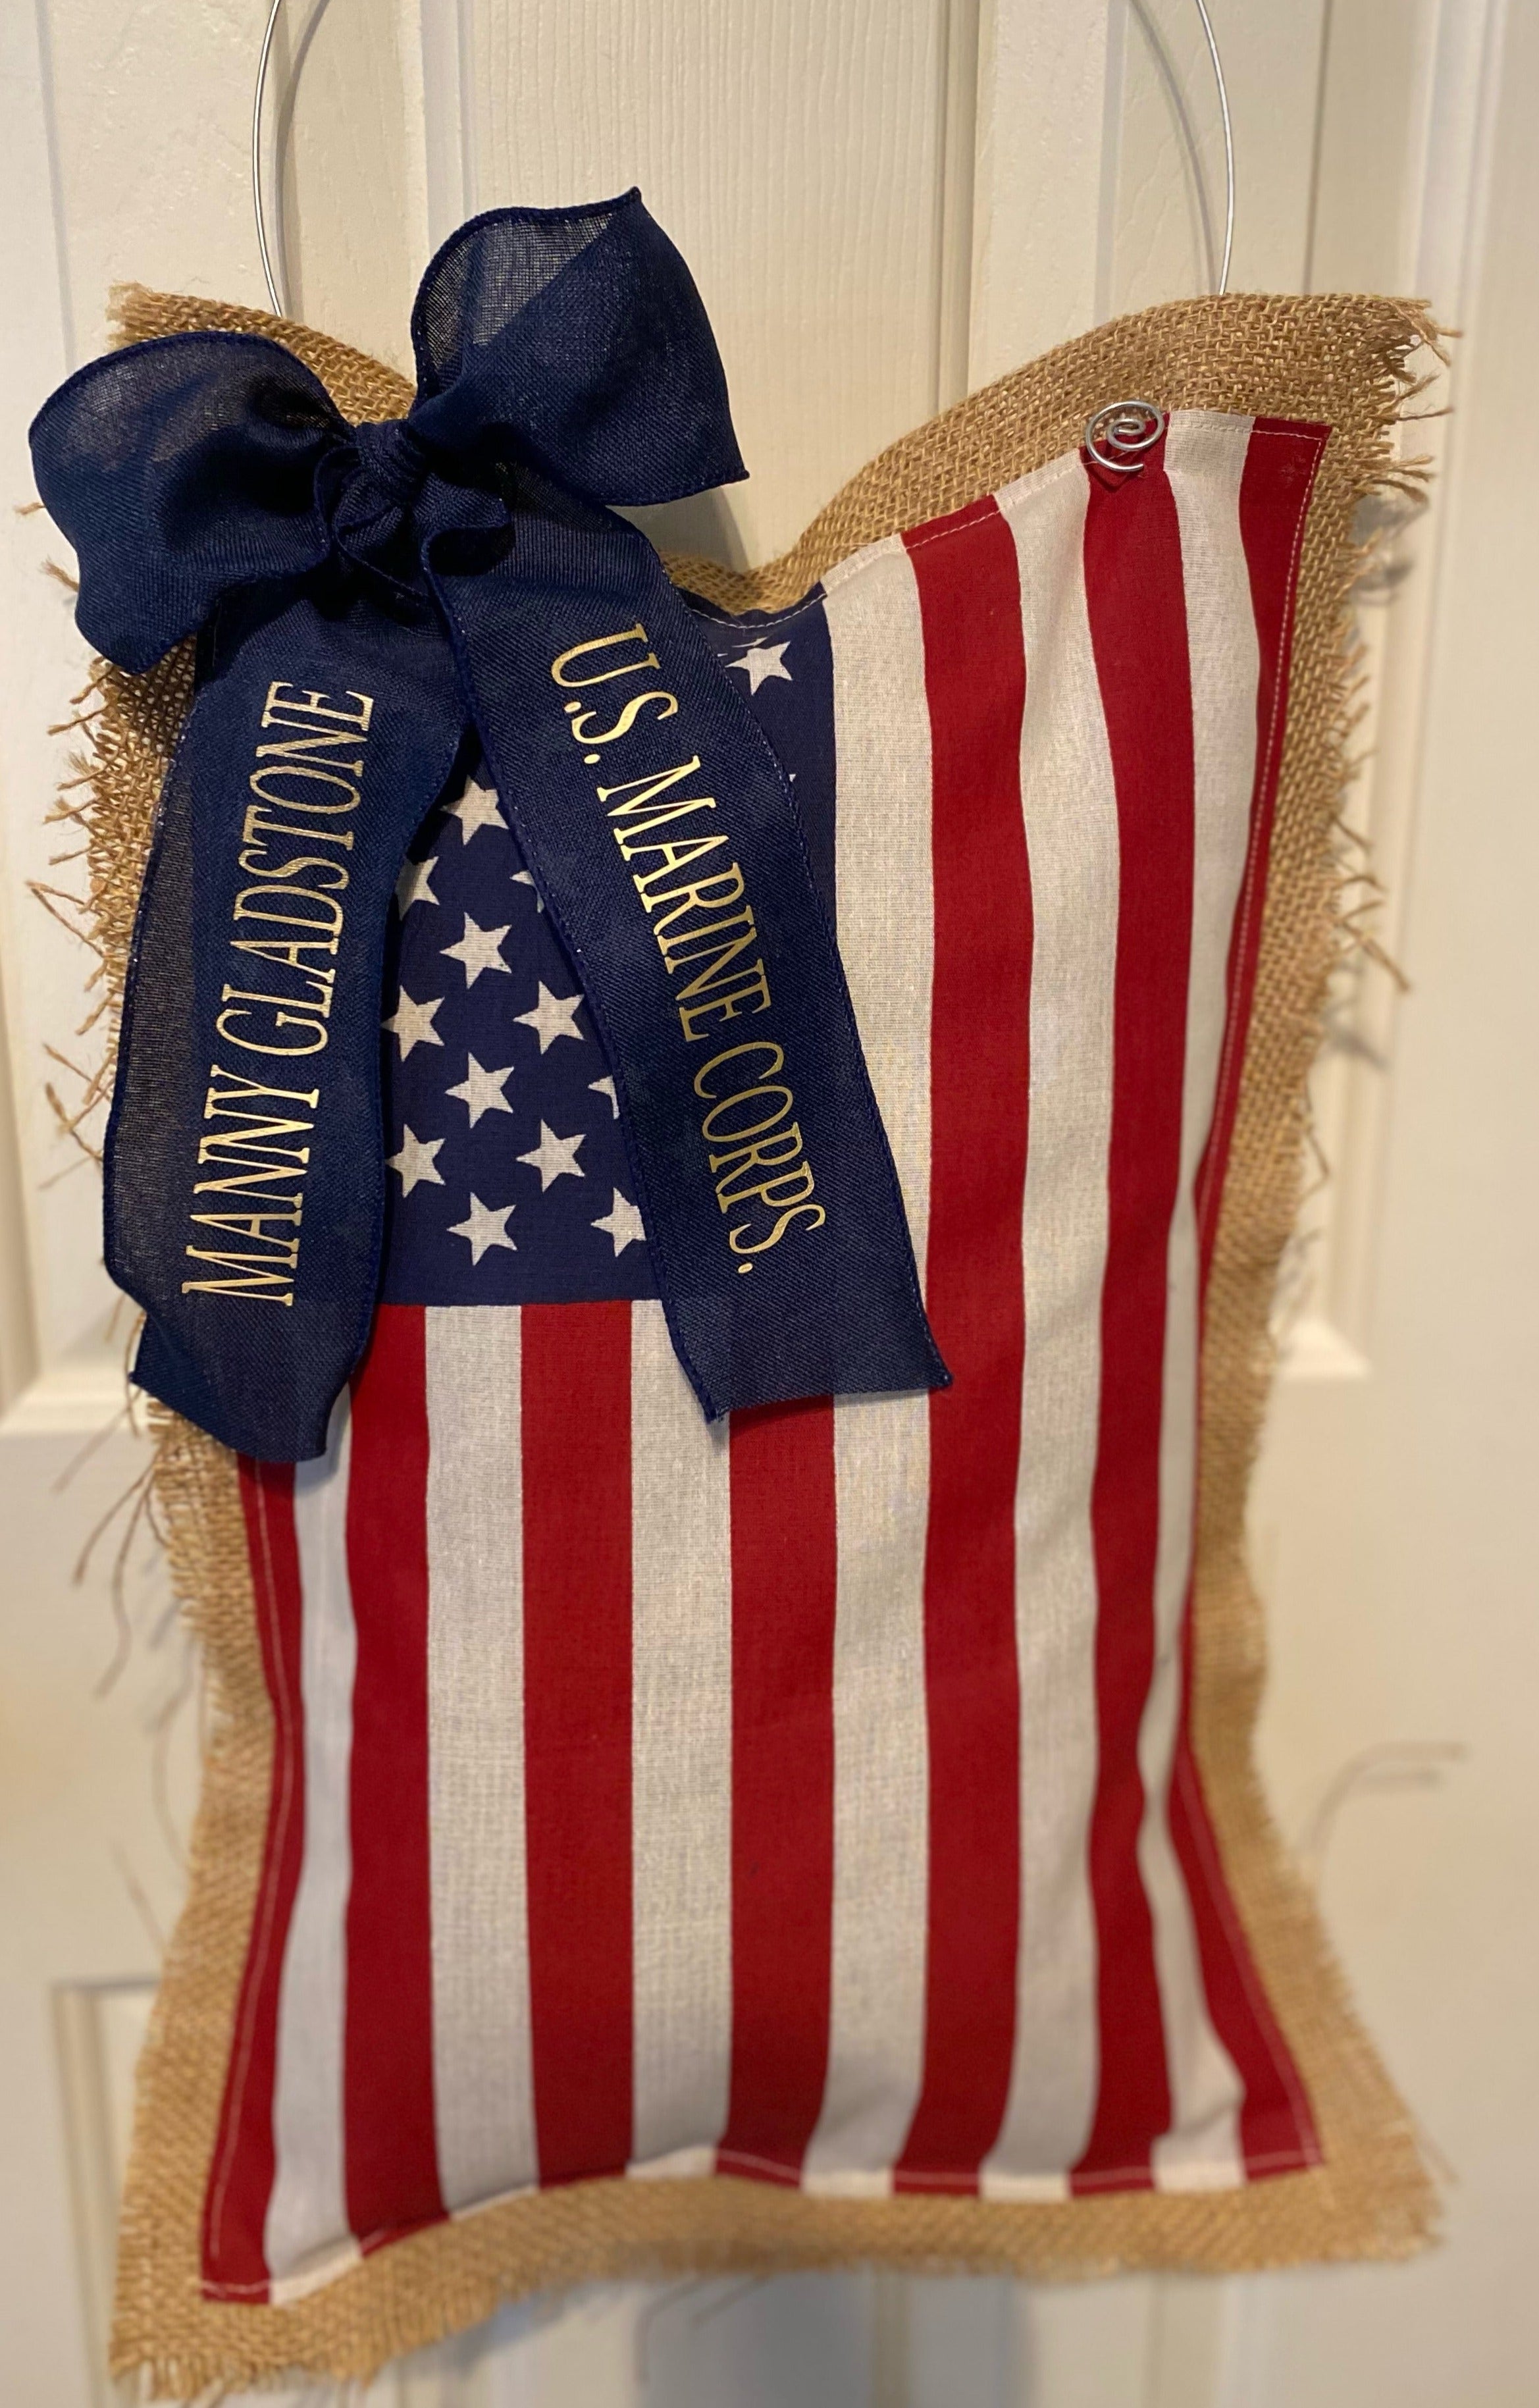 US Flag door hanger with burlap backing. great way to celebrate anyone who has served our great c0